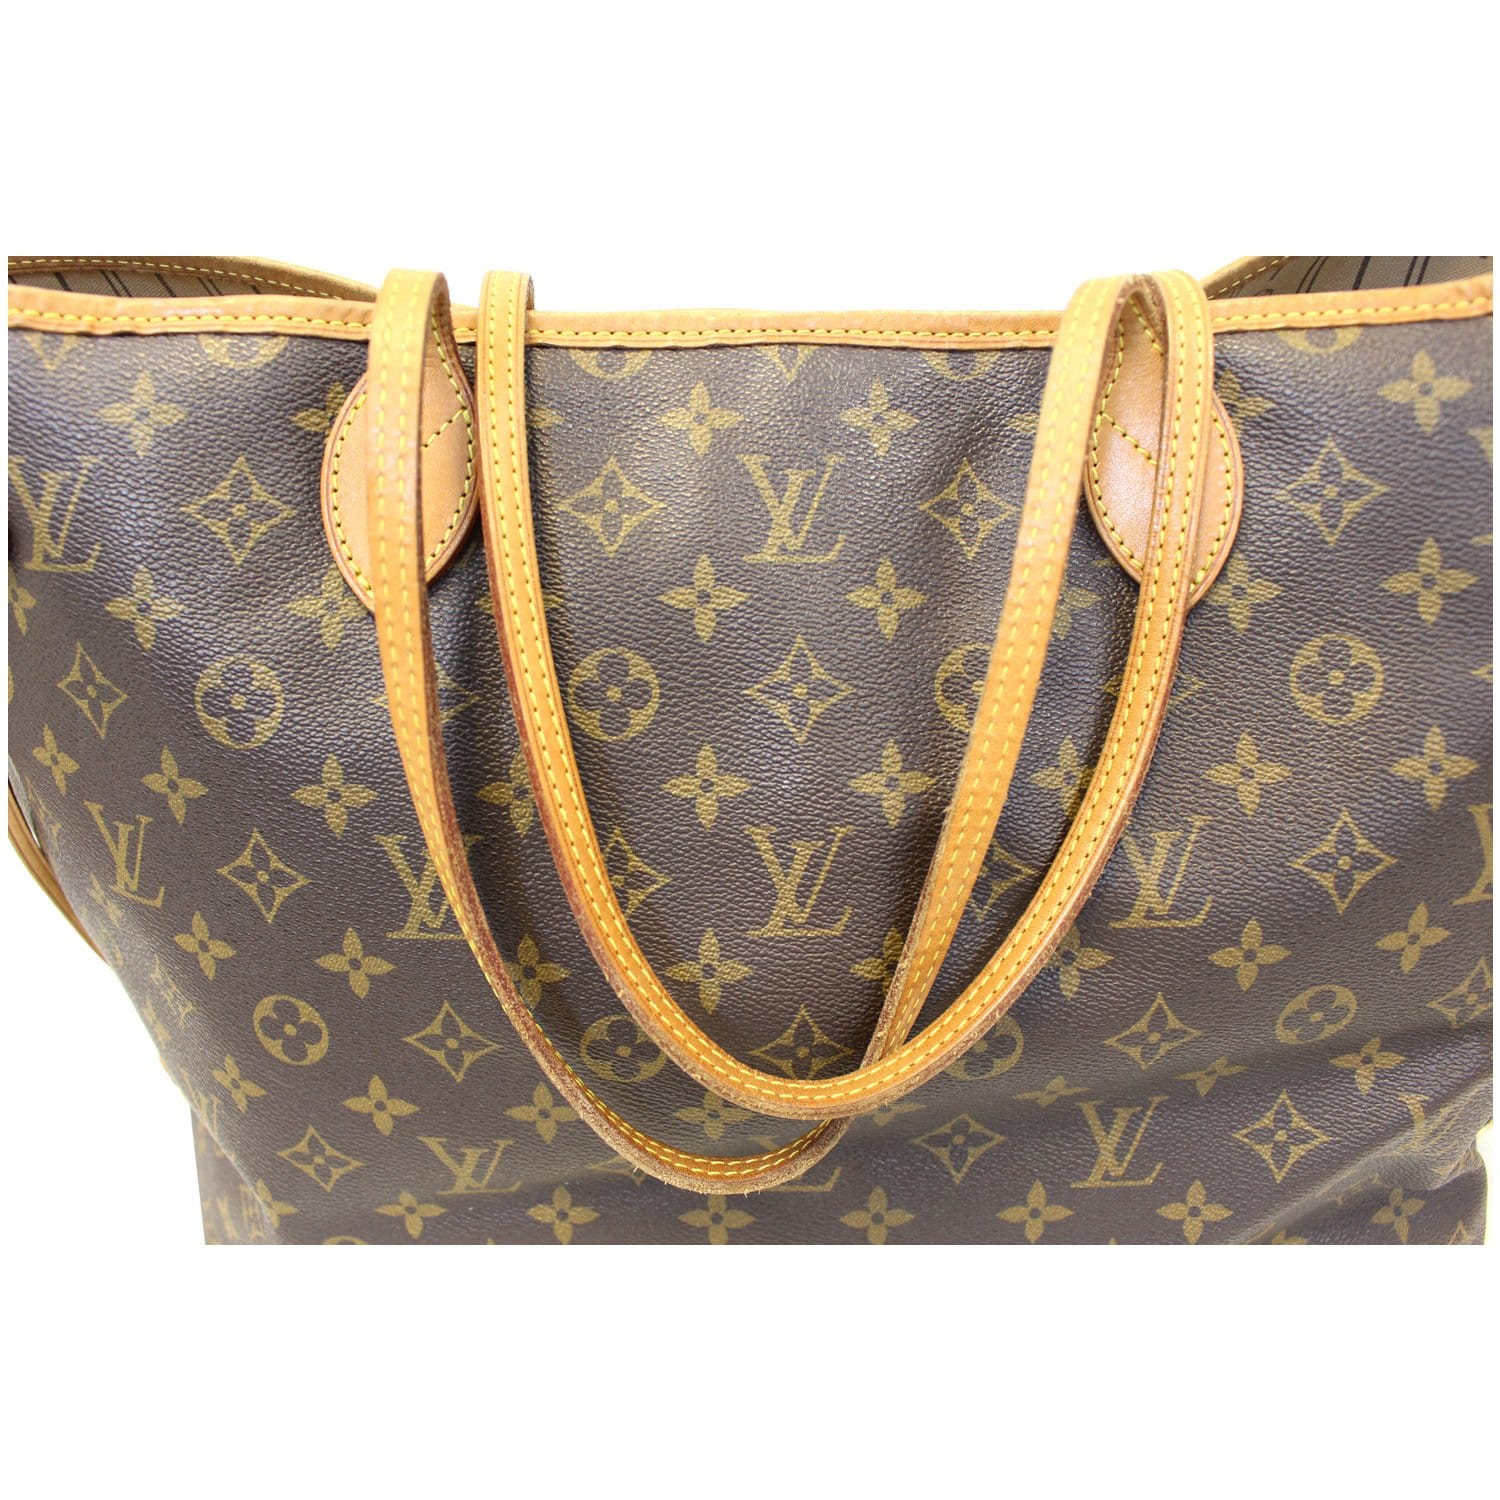 Louis Vuitton Neverfull GM Monogram Canvas Tote Bag with yellow